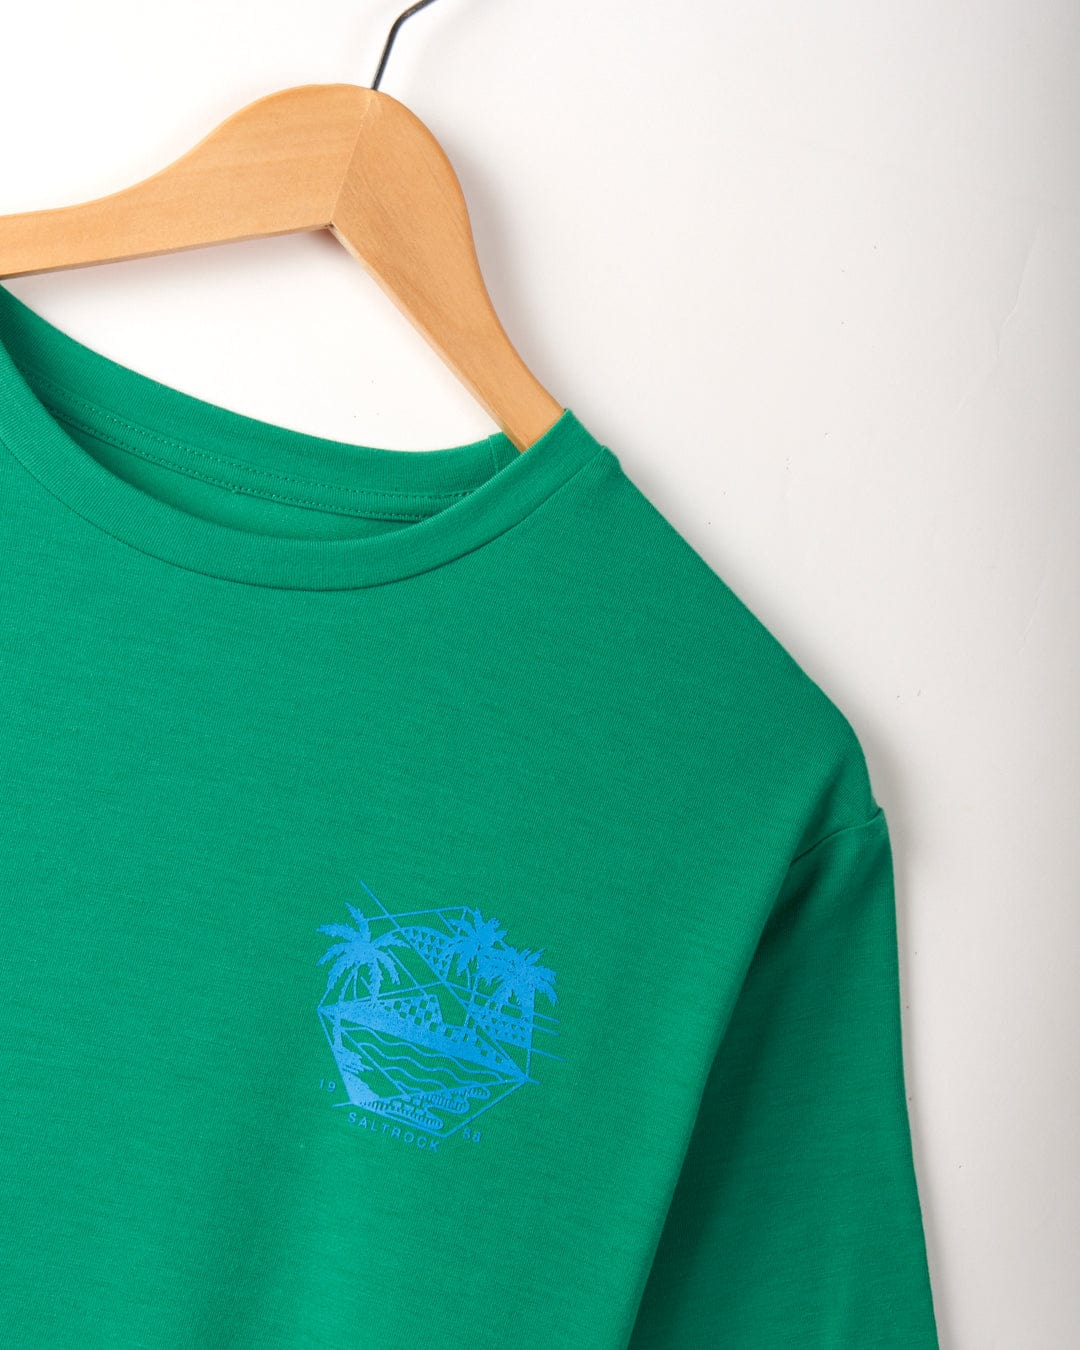 A Geo Palms Solid - Mens Recycled Hybrid T-Shirt - Green from Saltrock, featuring a blue Palm Beach graphic with palm trees and a hammock, made from recycled material, is hanging on a wooden hanger against a white background.